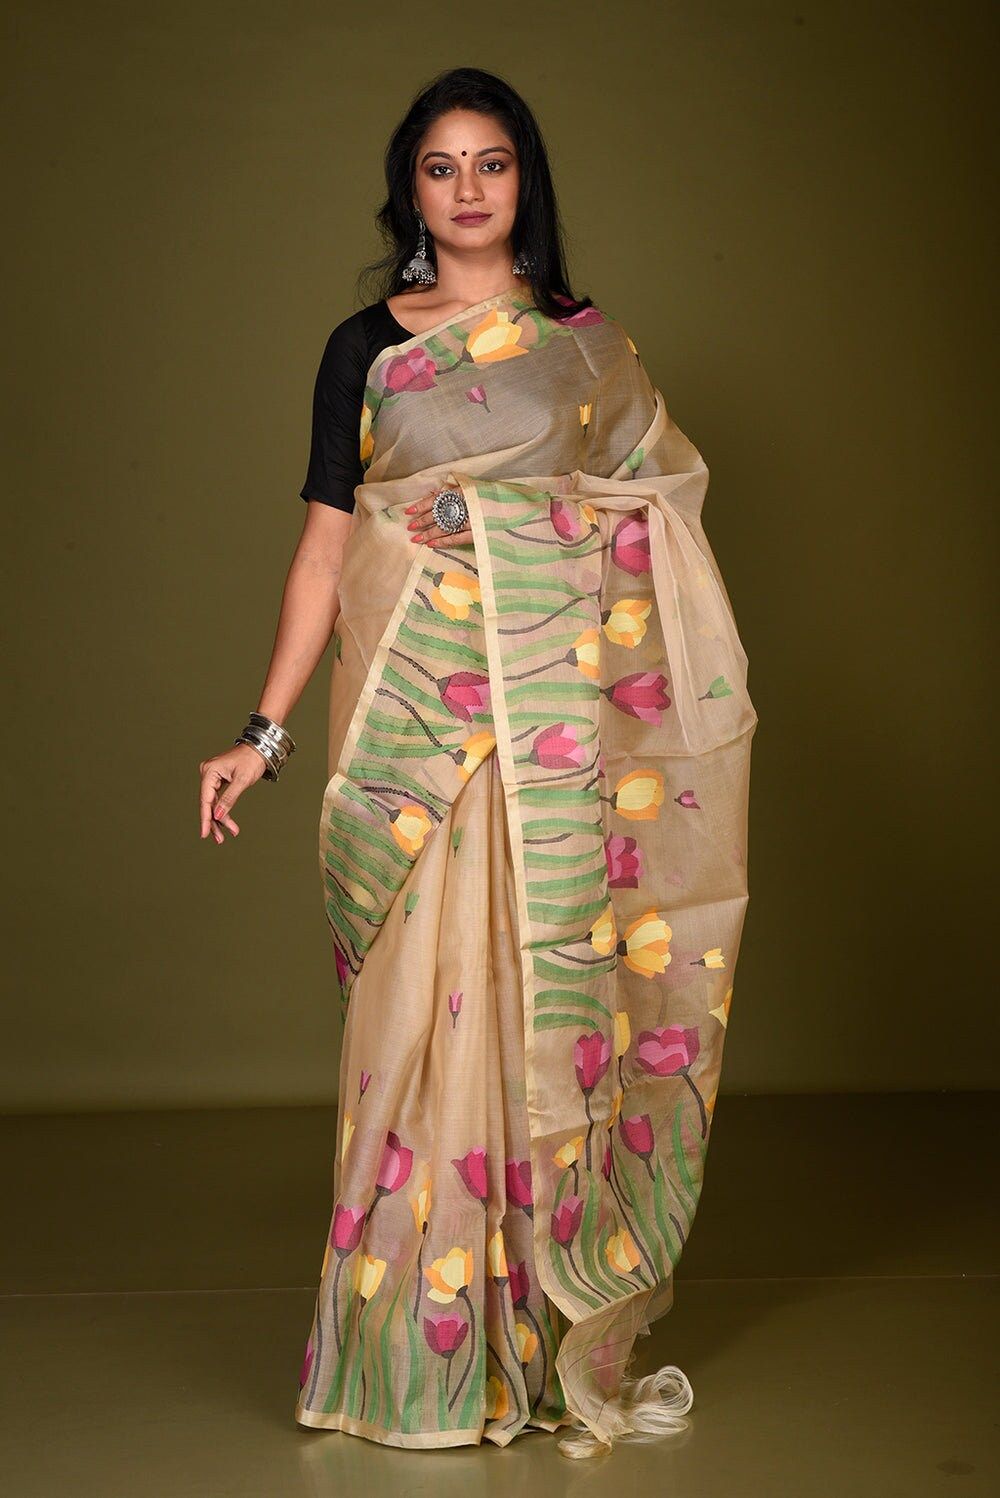 Muslin Sarees: Lightweight and Elegant Drapes for Every Occasion